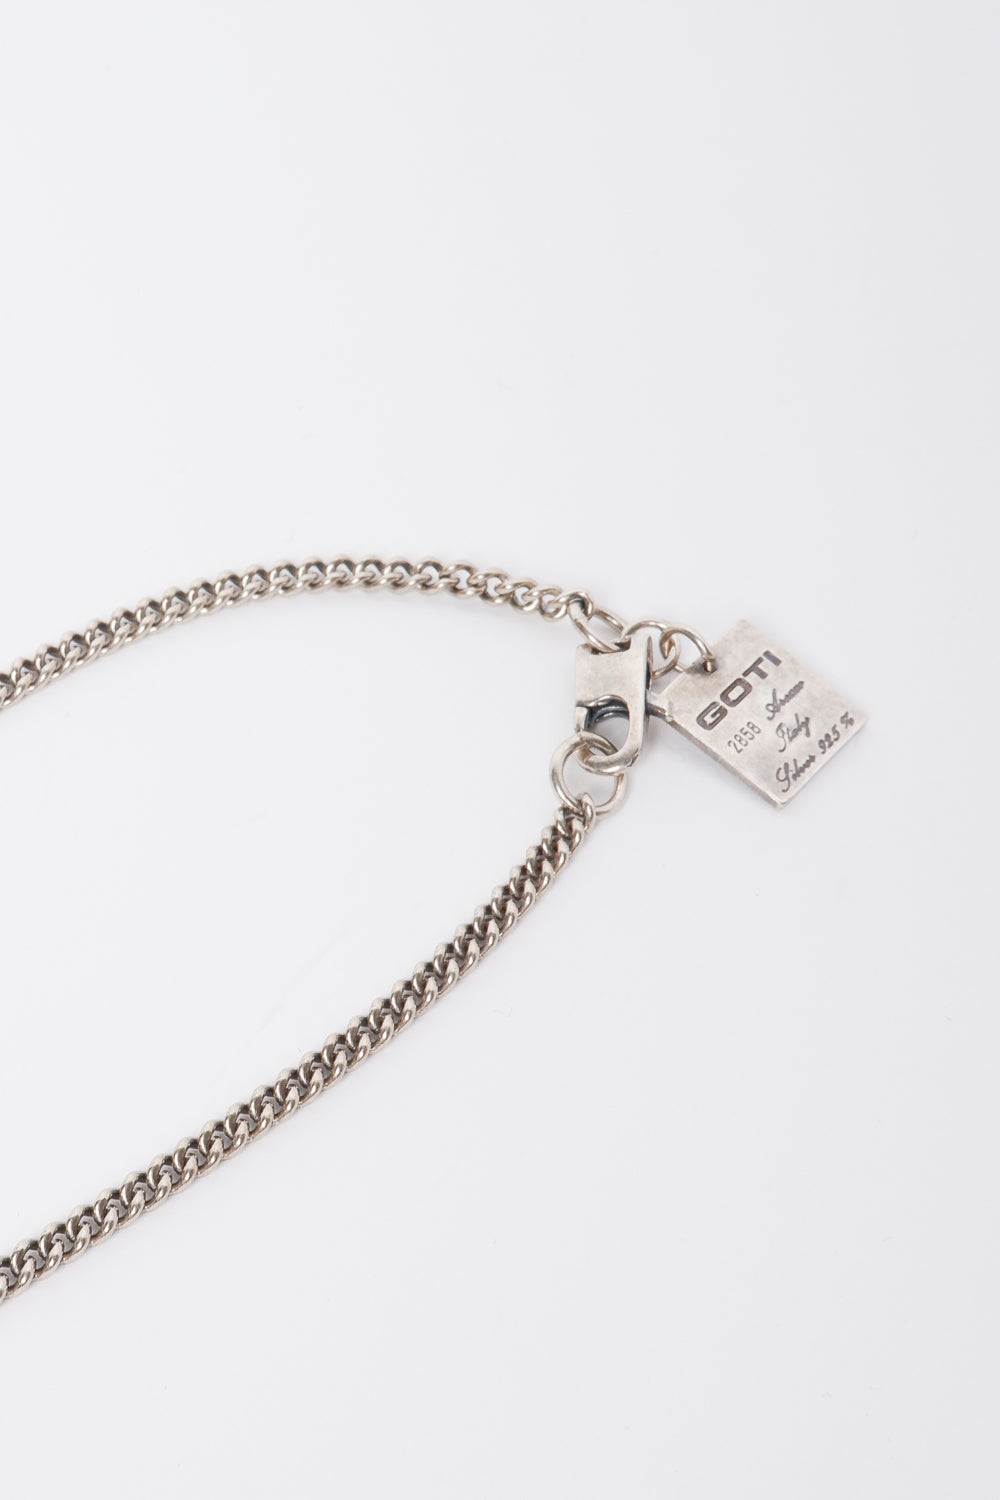 Buy the GOTI CN569 Necklace at Intro. Spend £50 for free UK delivery. Official stockists. We ship worldwide.